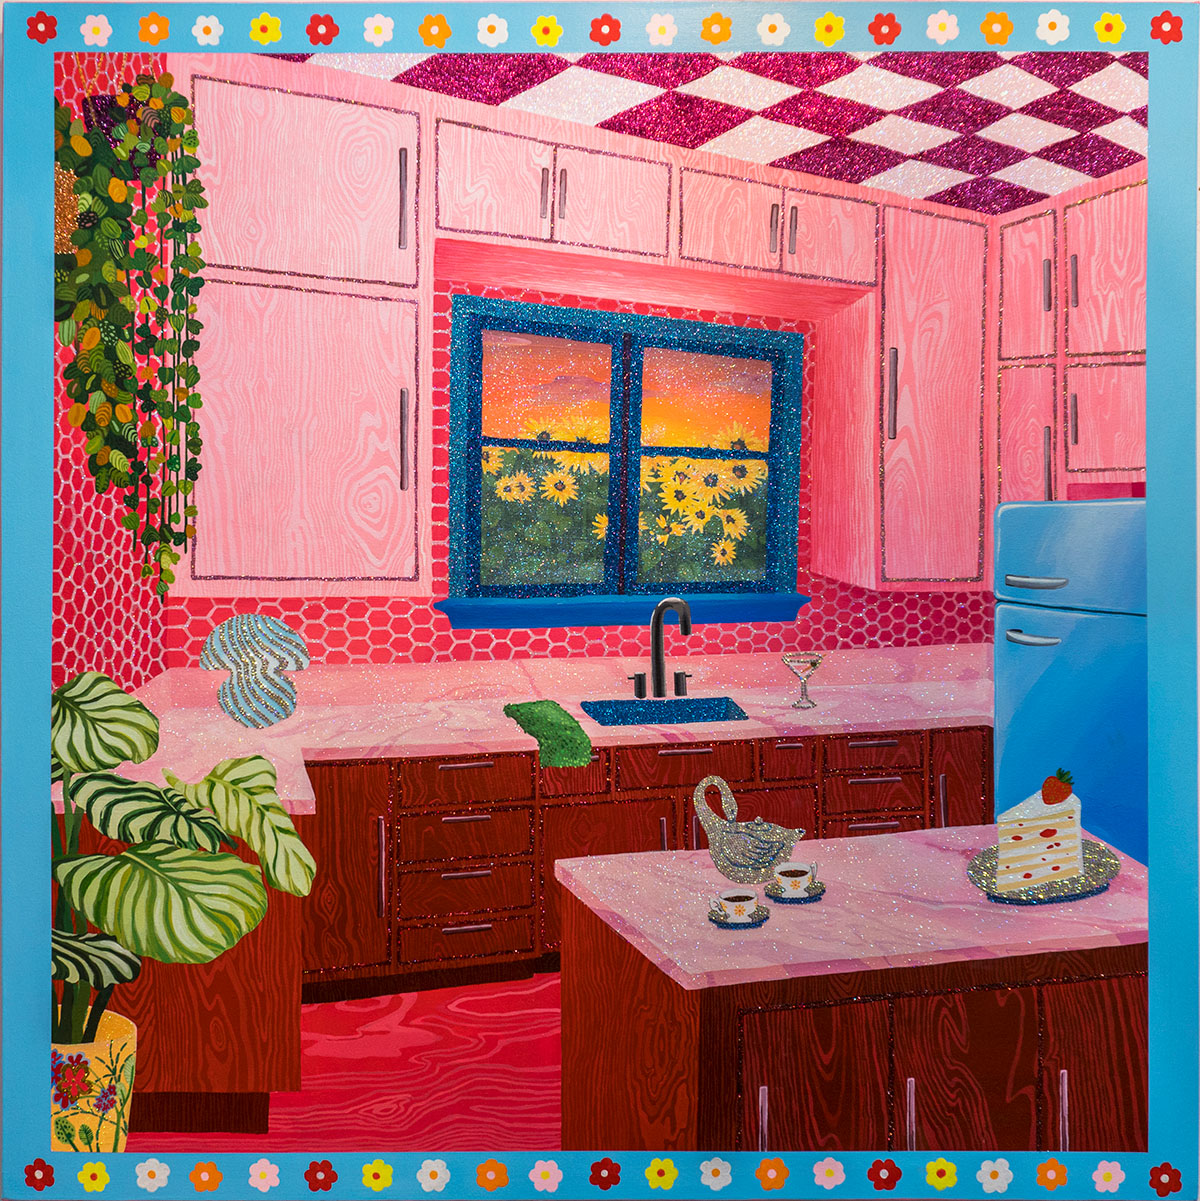 Southern Kitchen, 2020 Acrylic, glitter, and rhinestones on canvas 48 x 48 inches